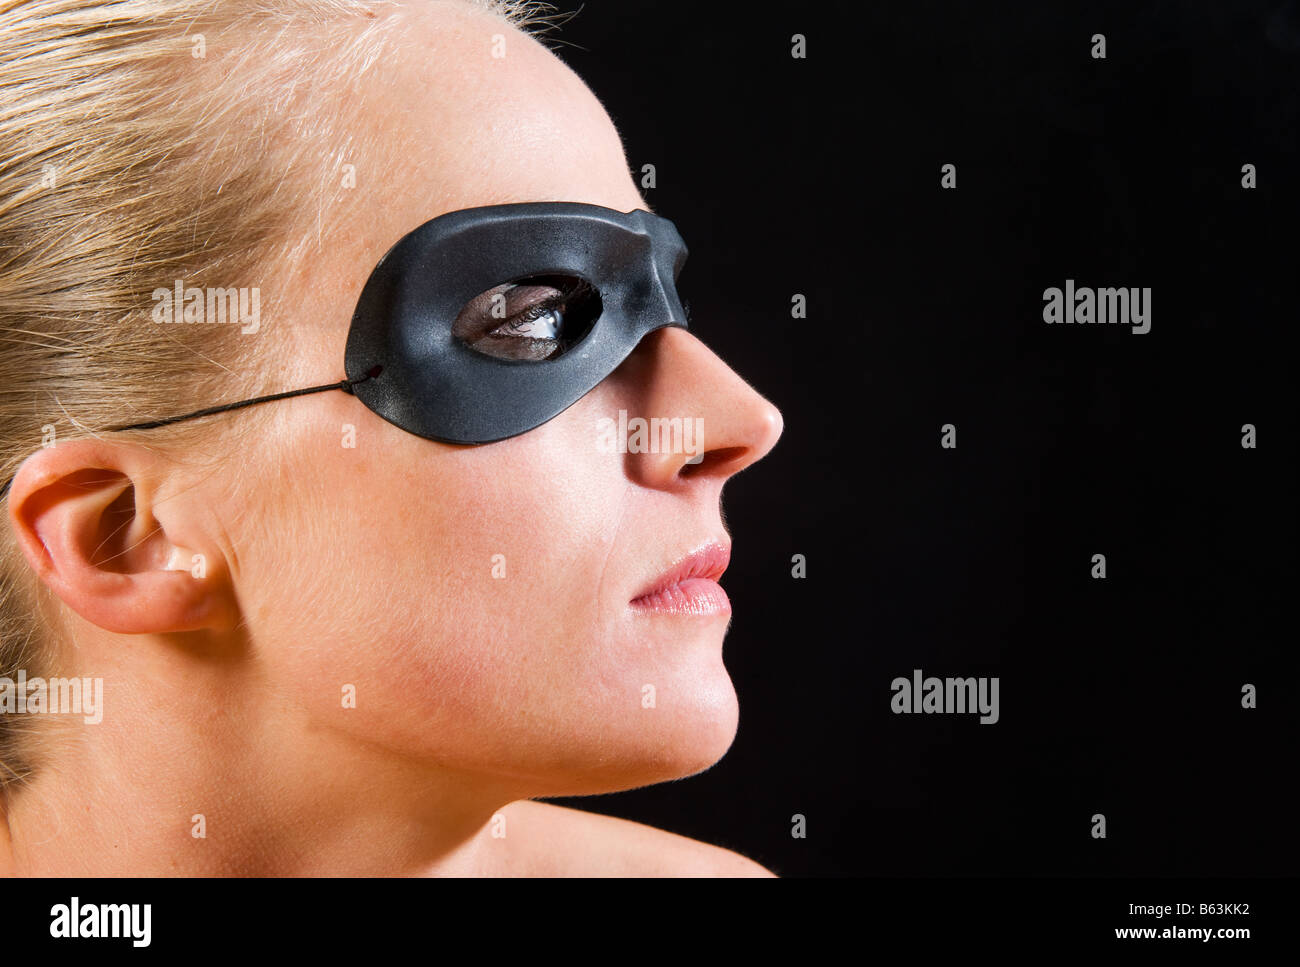 Blond girl wearing a mask seen in profile against black background Stock Photo